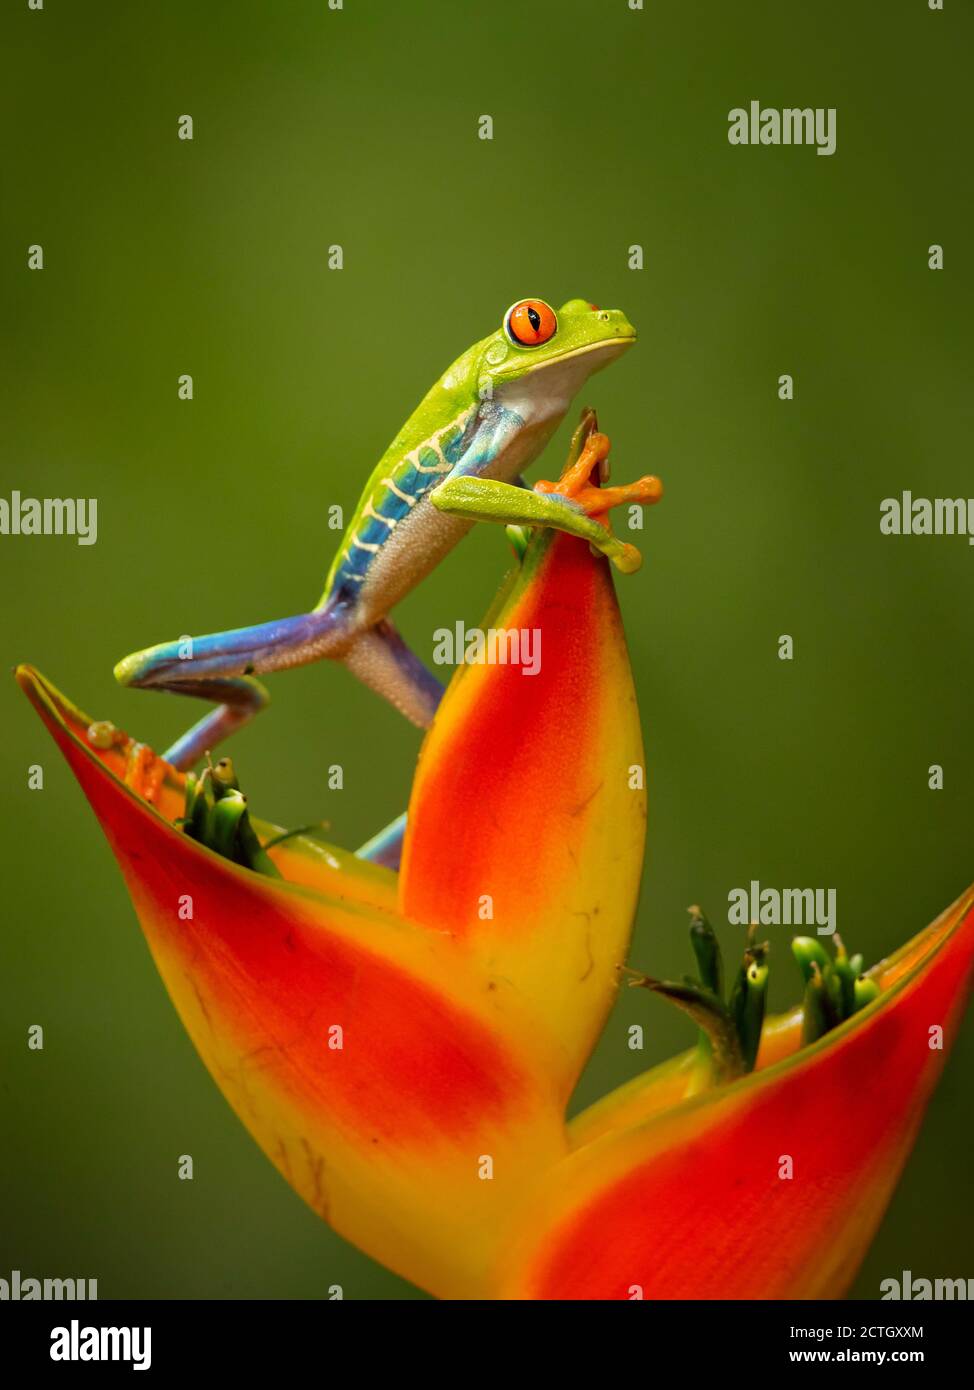 Agalychnis callidryas, known as the red-eyed treefrog, is an arboreal hylid native to Neotropical rainforests. Taken in Costa Rica Stock Photo